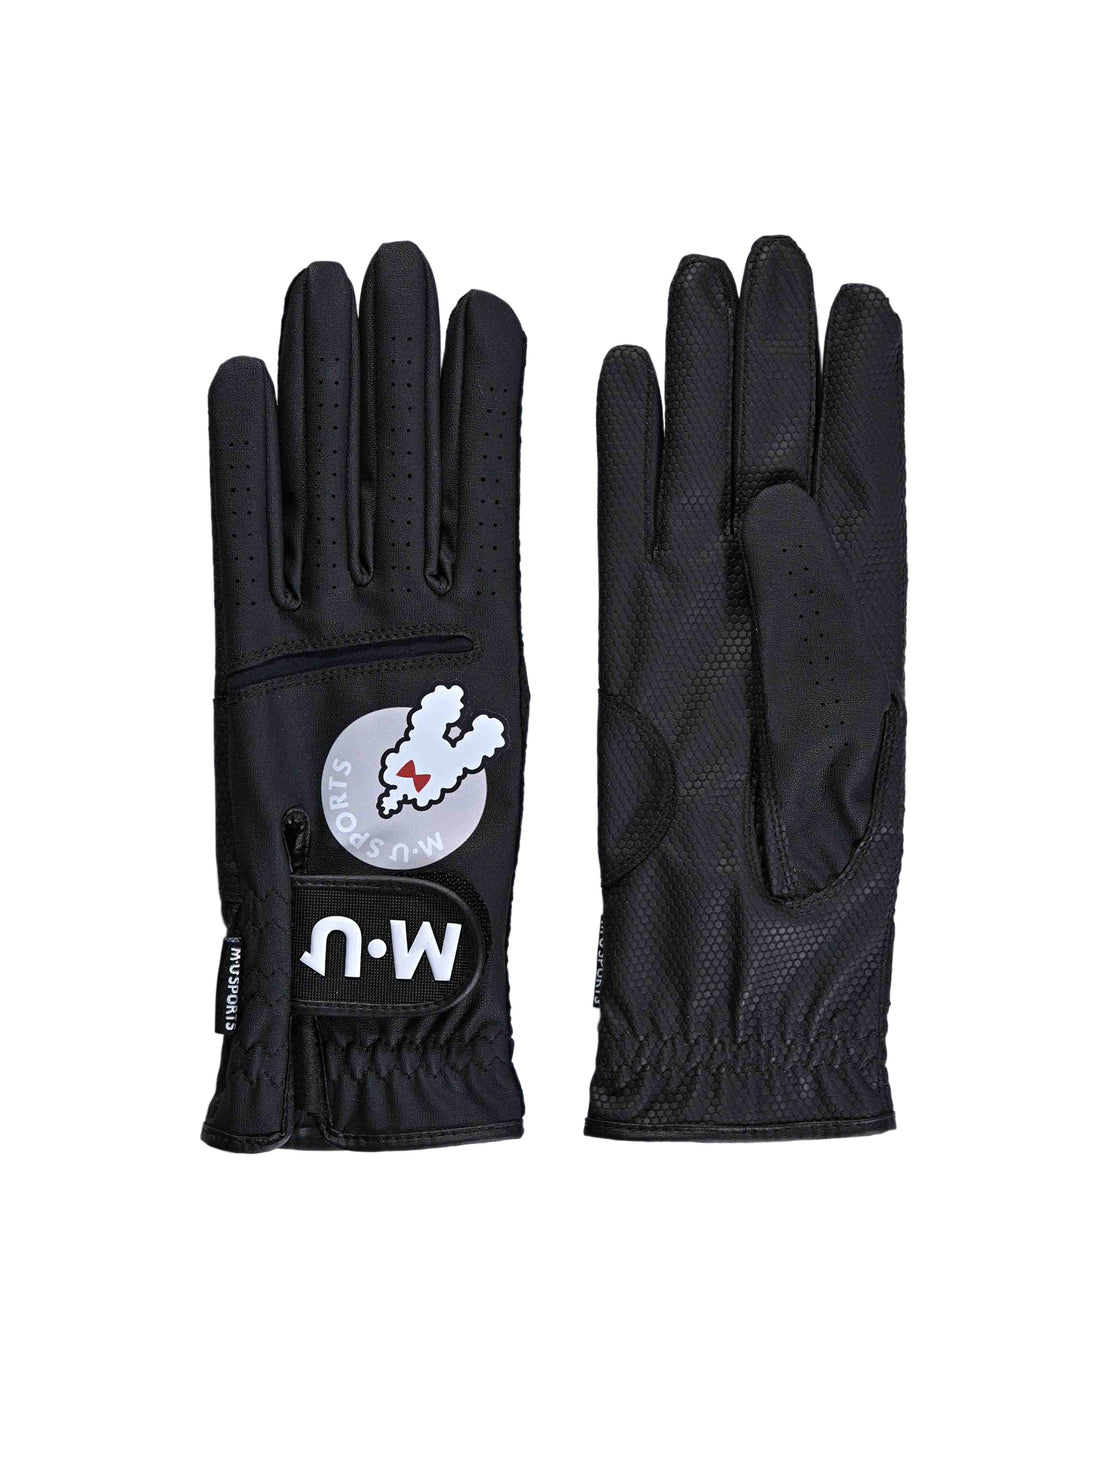 Tunnel motif two-handed gloves (703J6800)